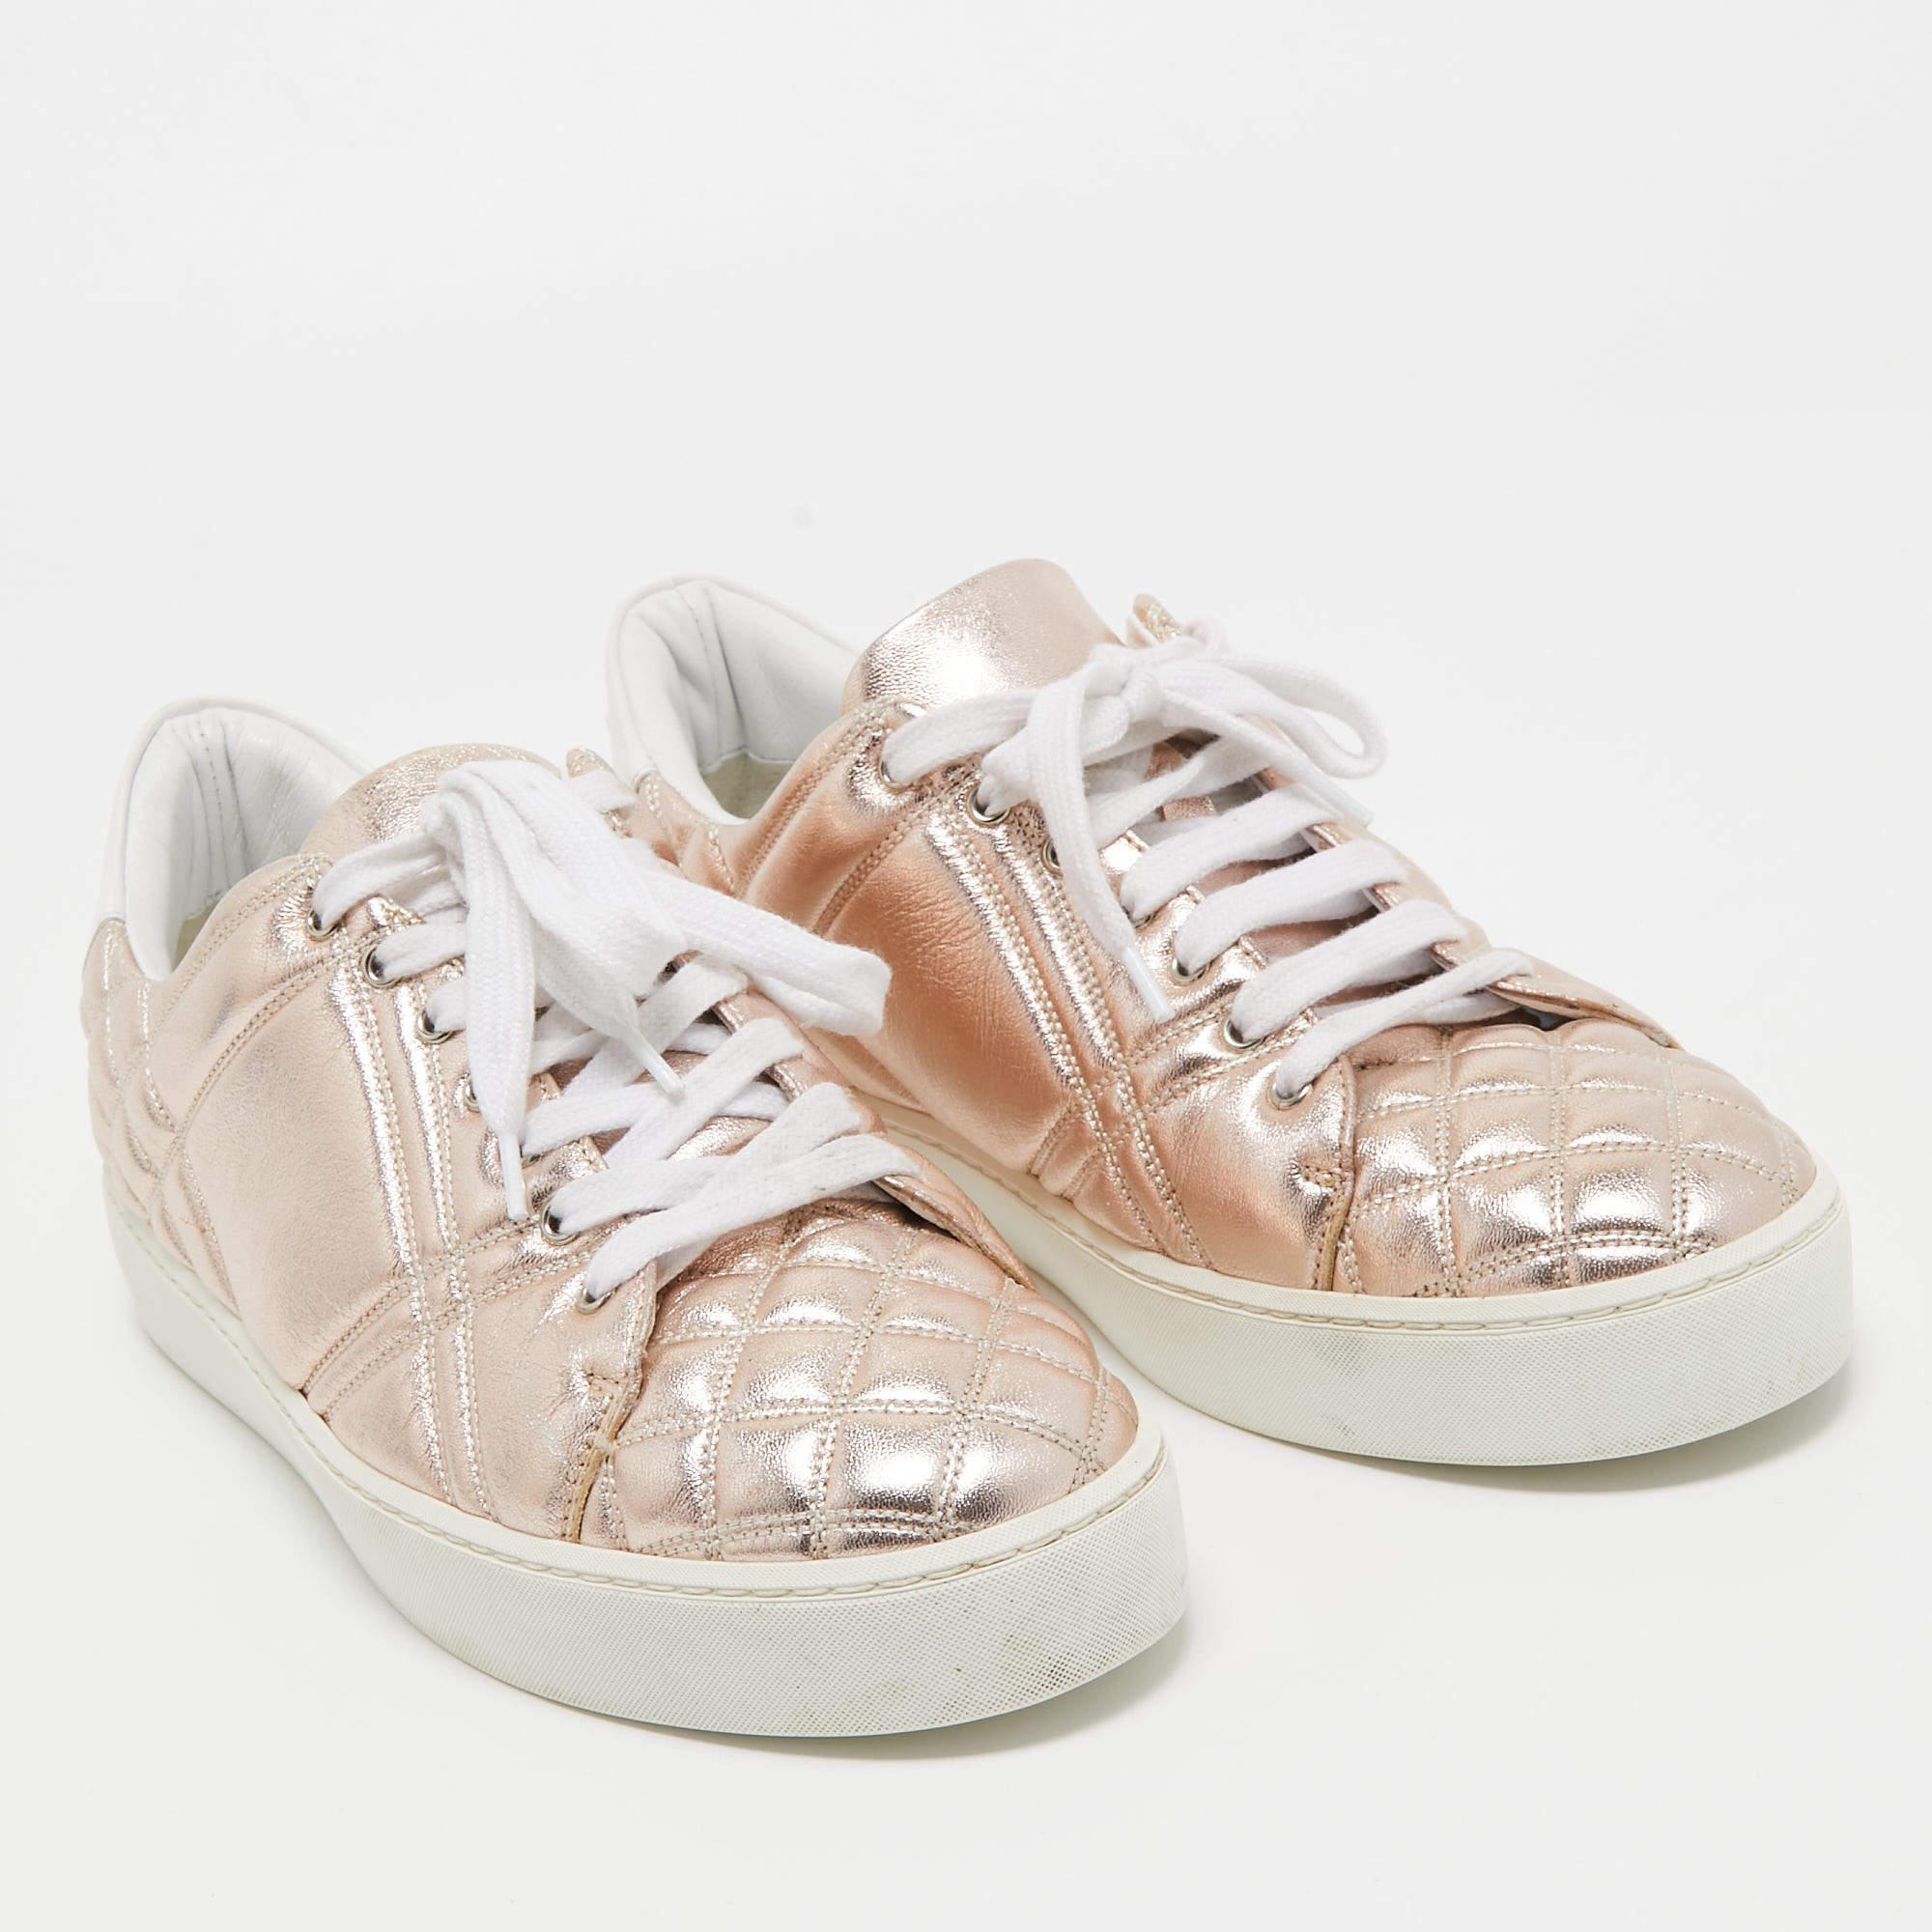 Burberry Metallic Pink Quilted Leather Westford Low Top Sneakers Size 39 4